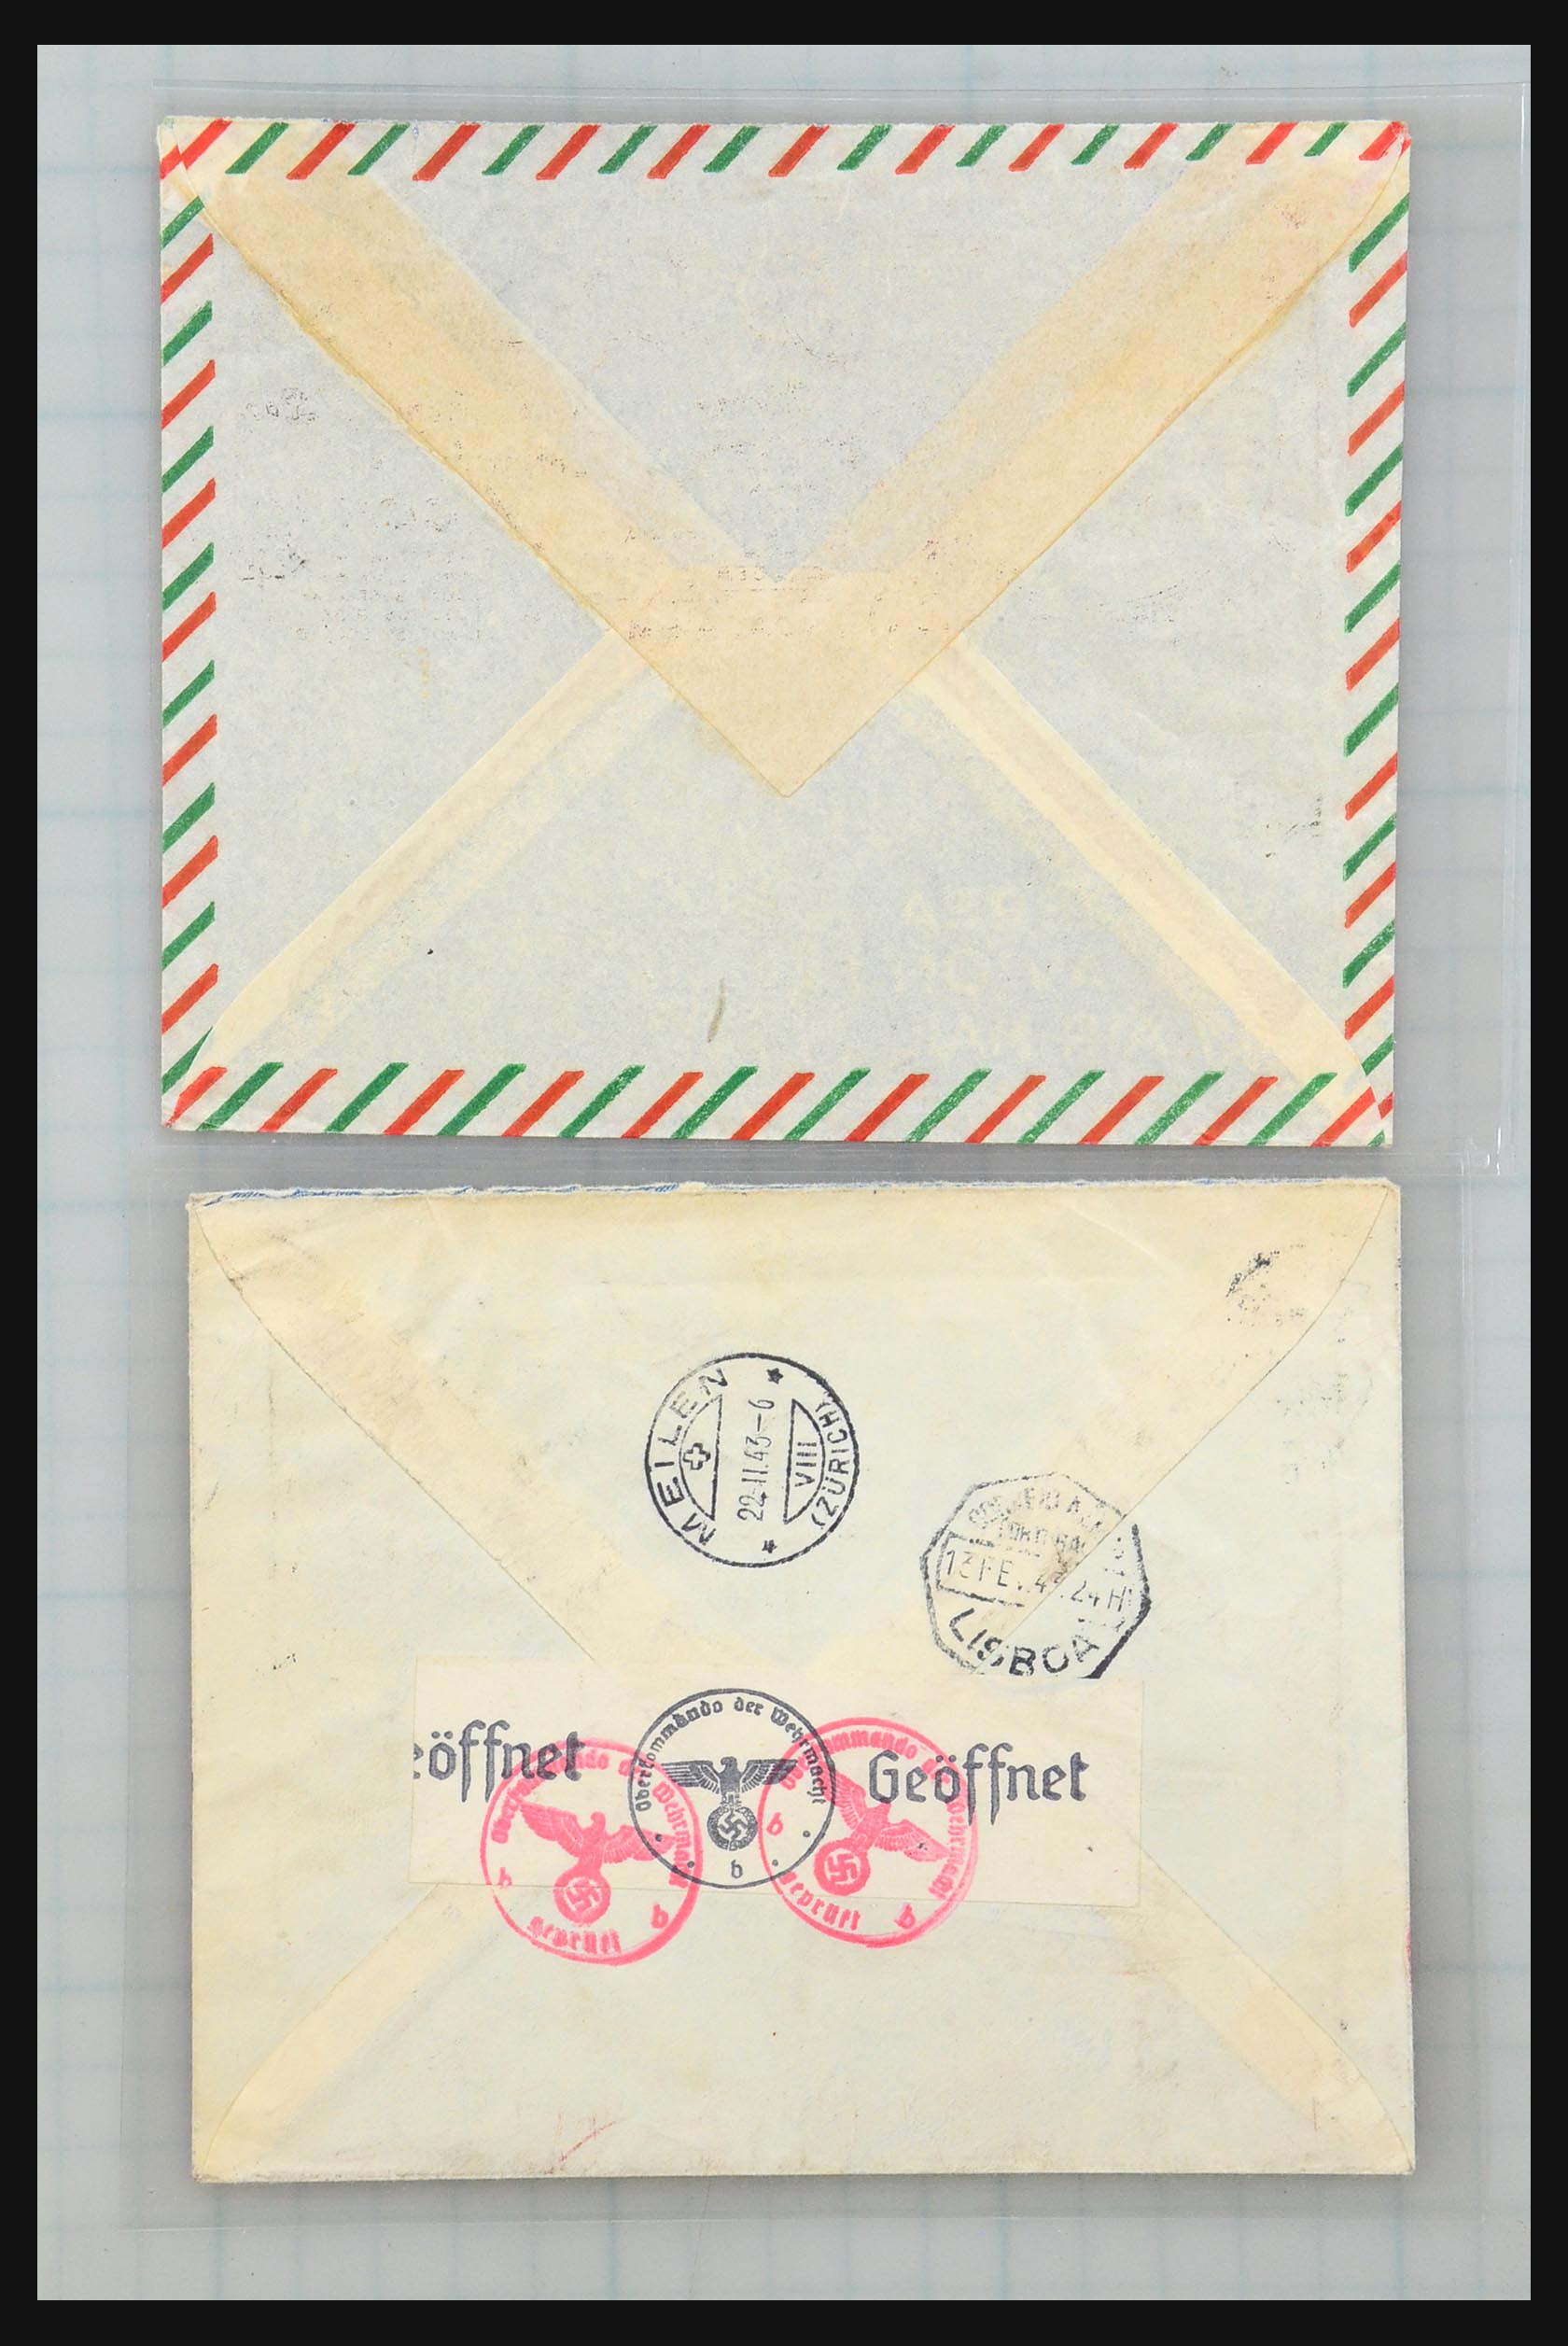 31358 227 - 31358 Portugal/Luxemburg/Greece covers 1880-1960.